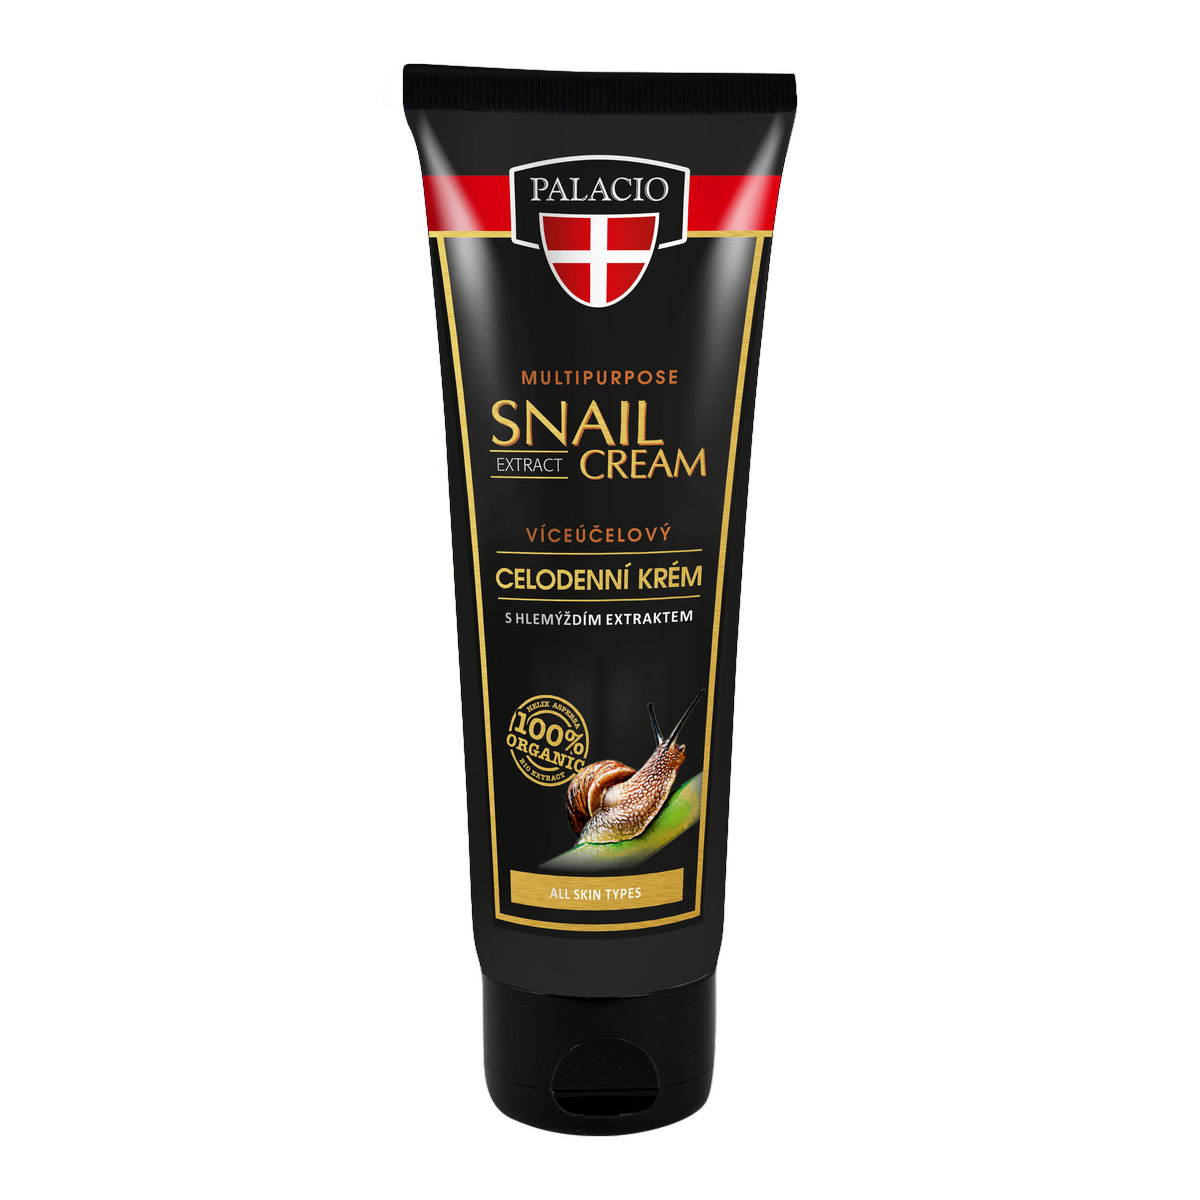 SNAIL EXTRACT Multipurpouse Cream 125ml P1305 ENG WEB 60